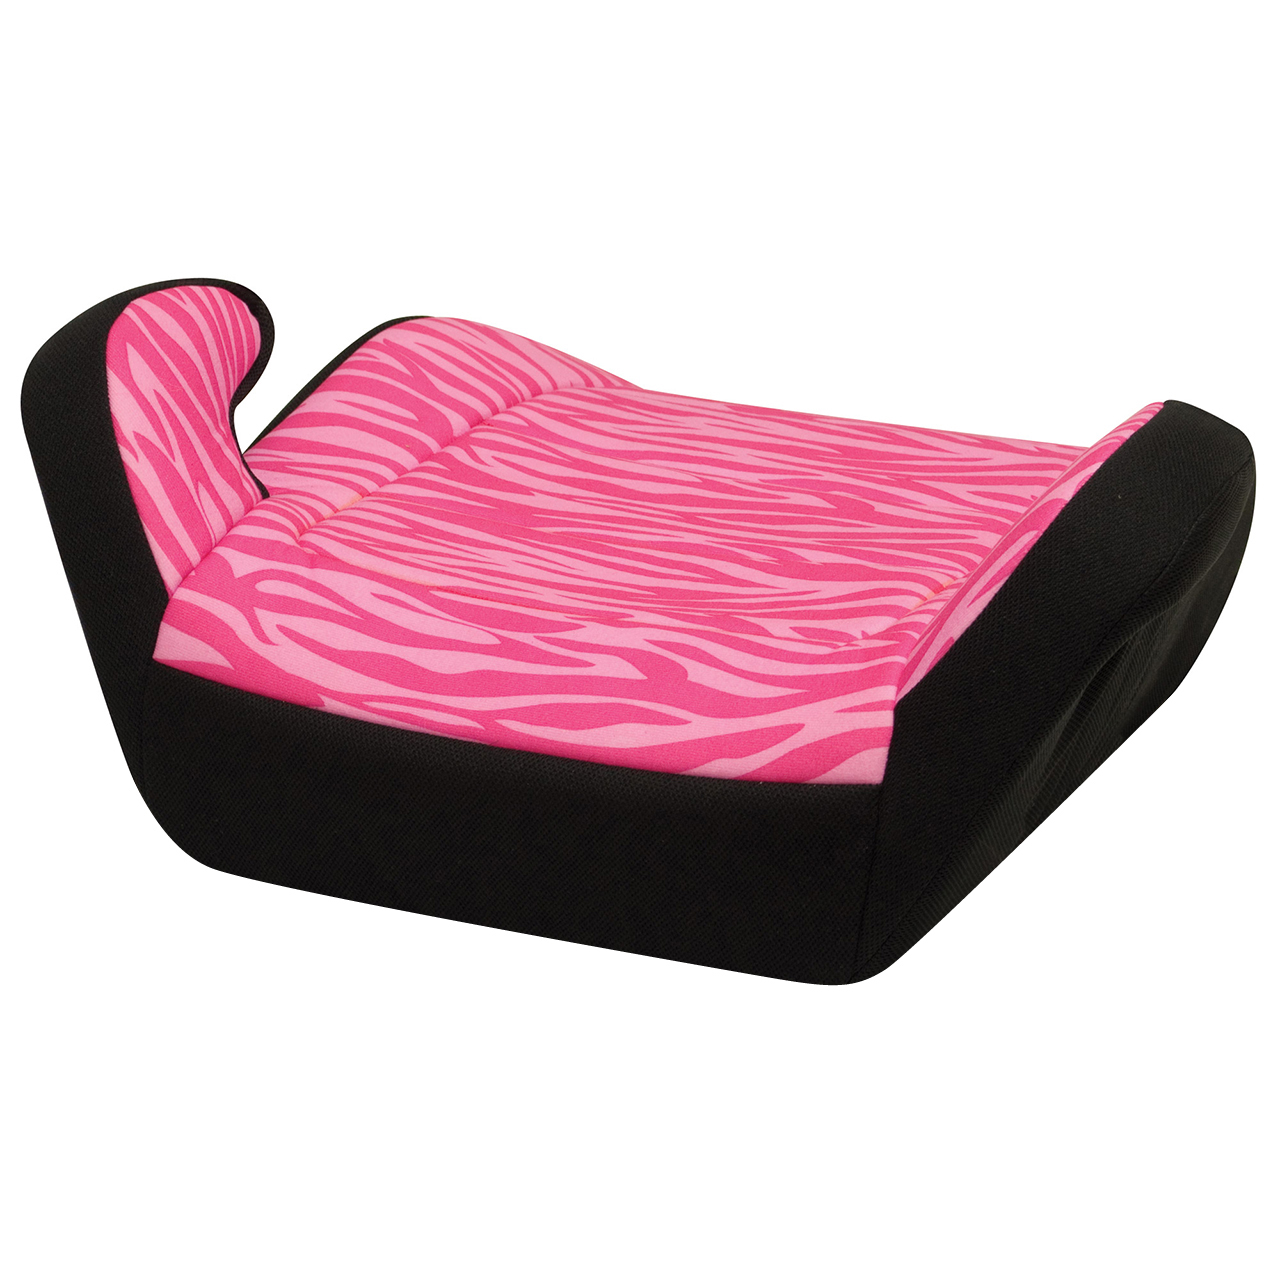 Harmony Juvenile Youth Backless Booster Car Seat, Pink Zebra - image 3 of 7